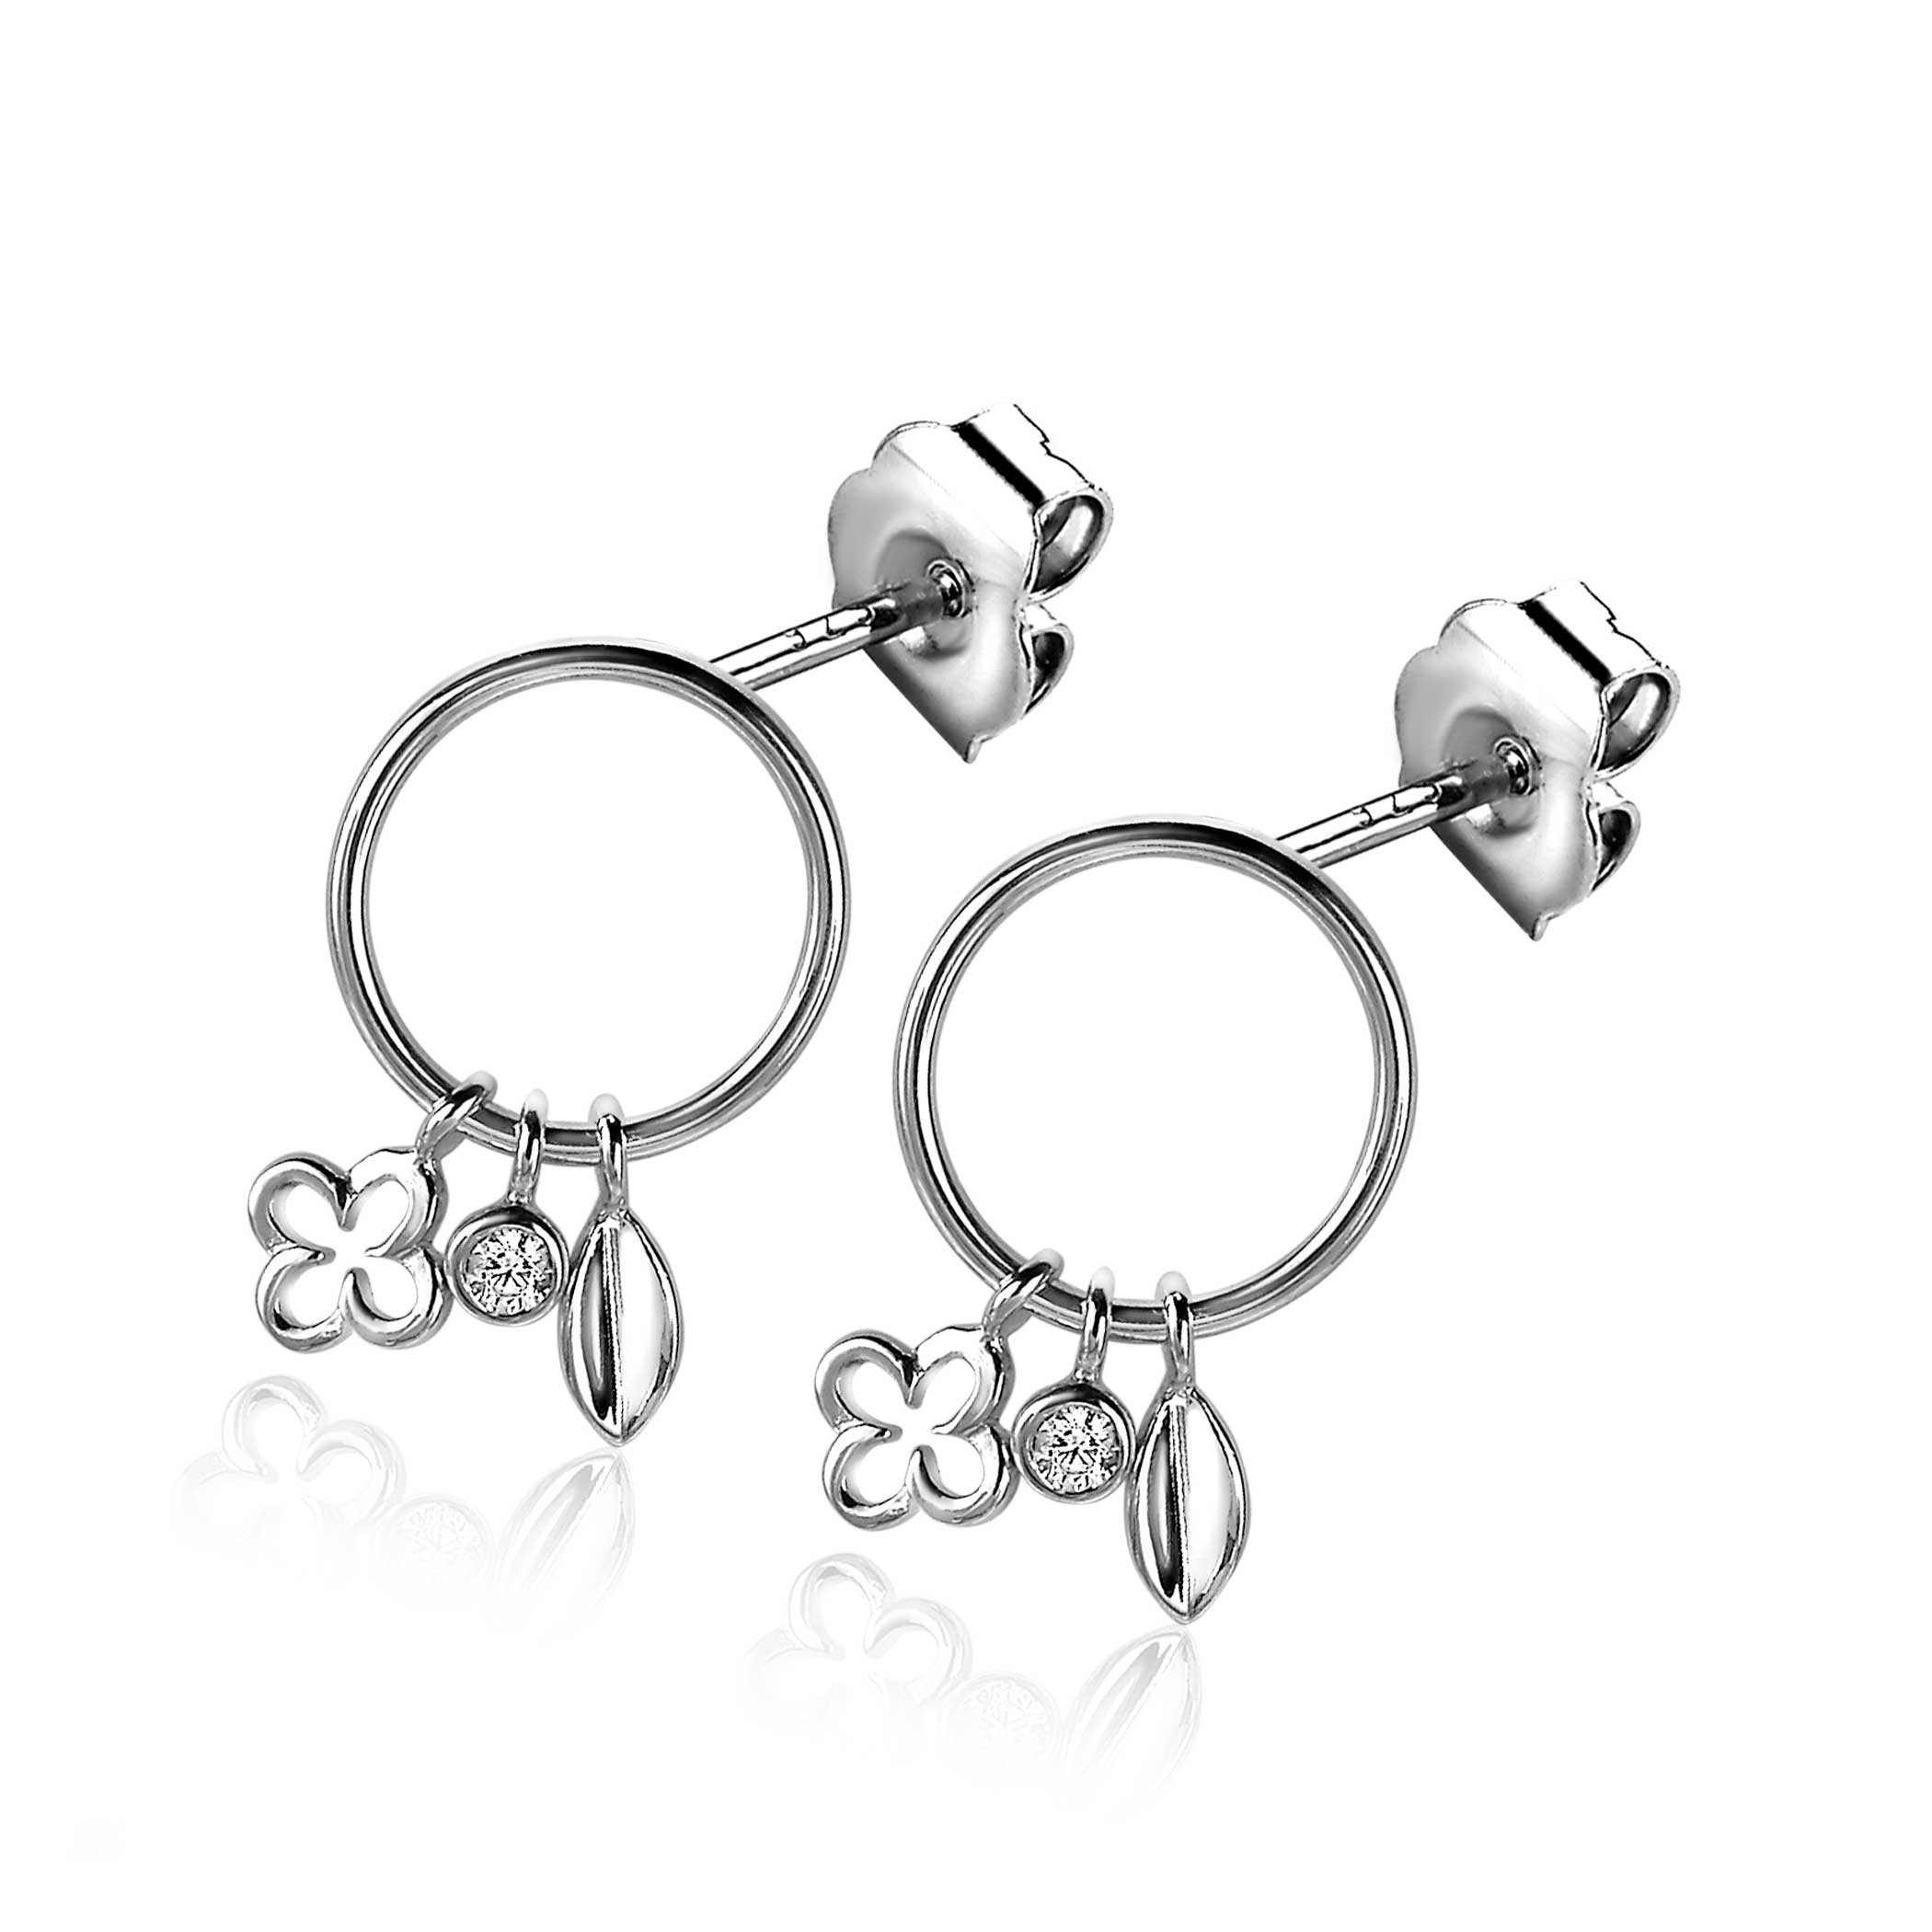 ZINZI Sterling Silver Earrings Open Circle with 3 Fantasy Charms Clover, White Zirconia and Leaf ZIO1875